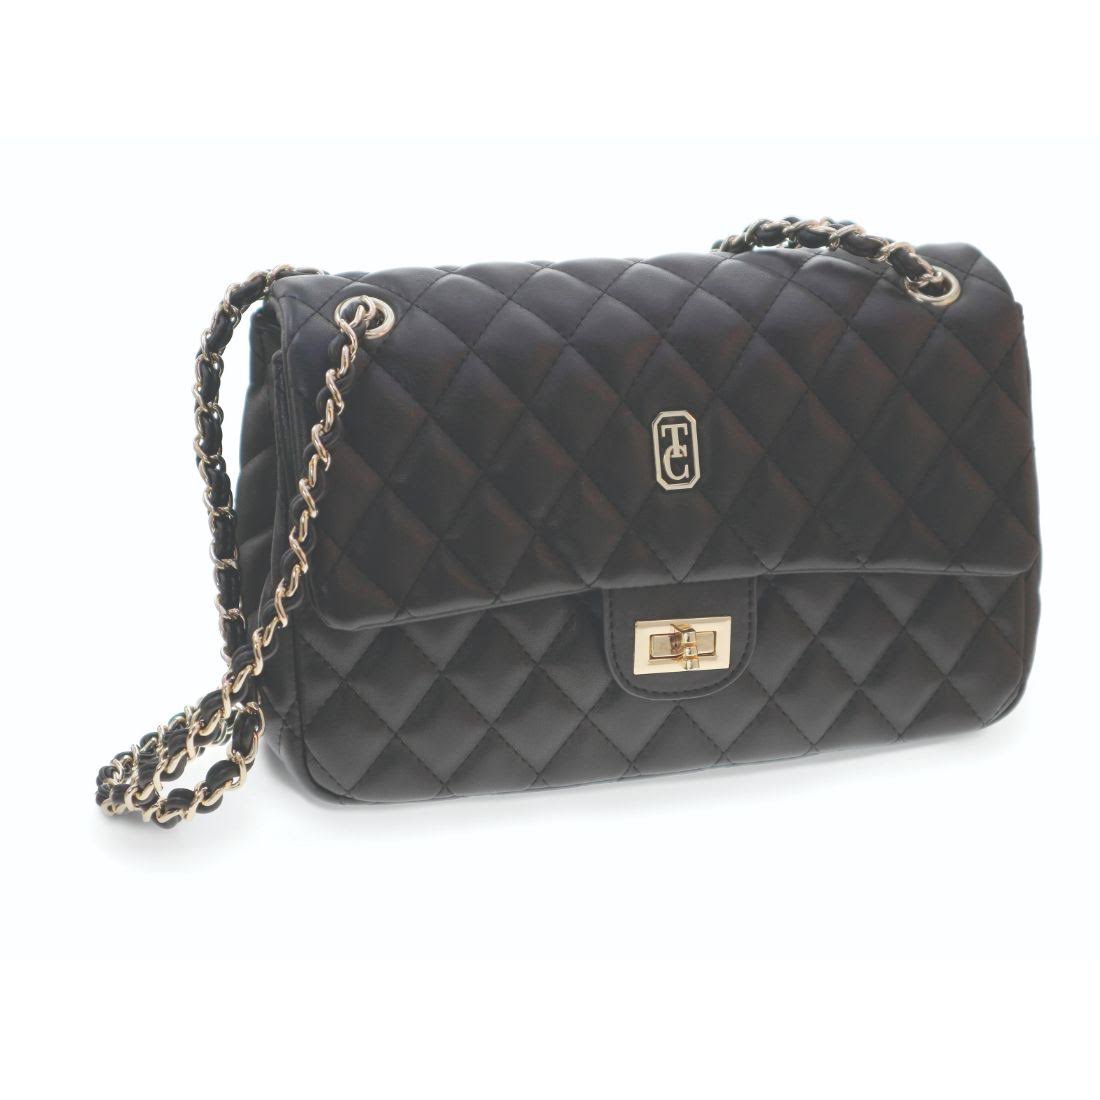 Tipperary Crystal Quilted Black Shoulder Bag With Gold Hardware